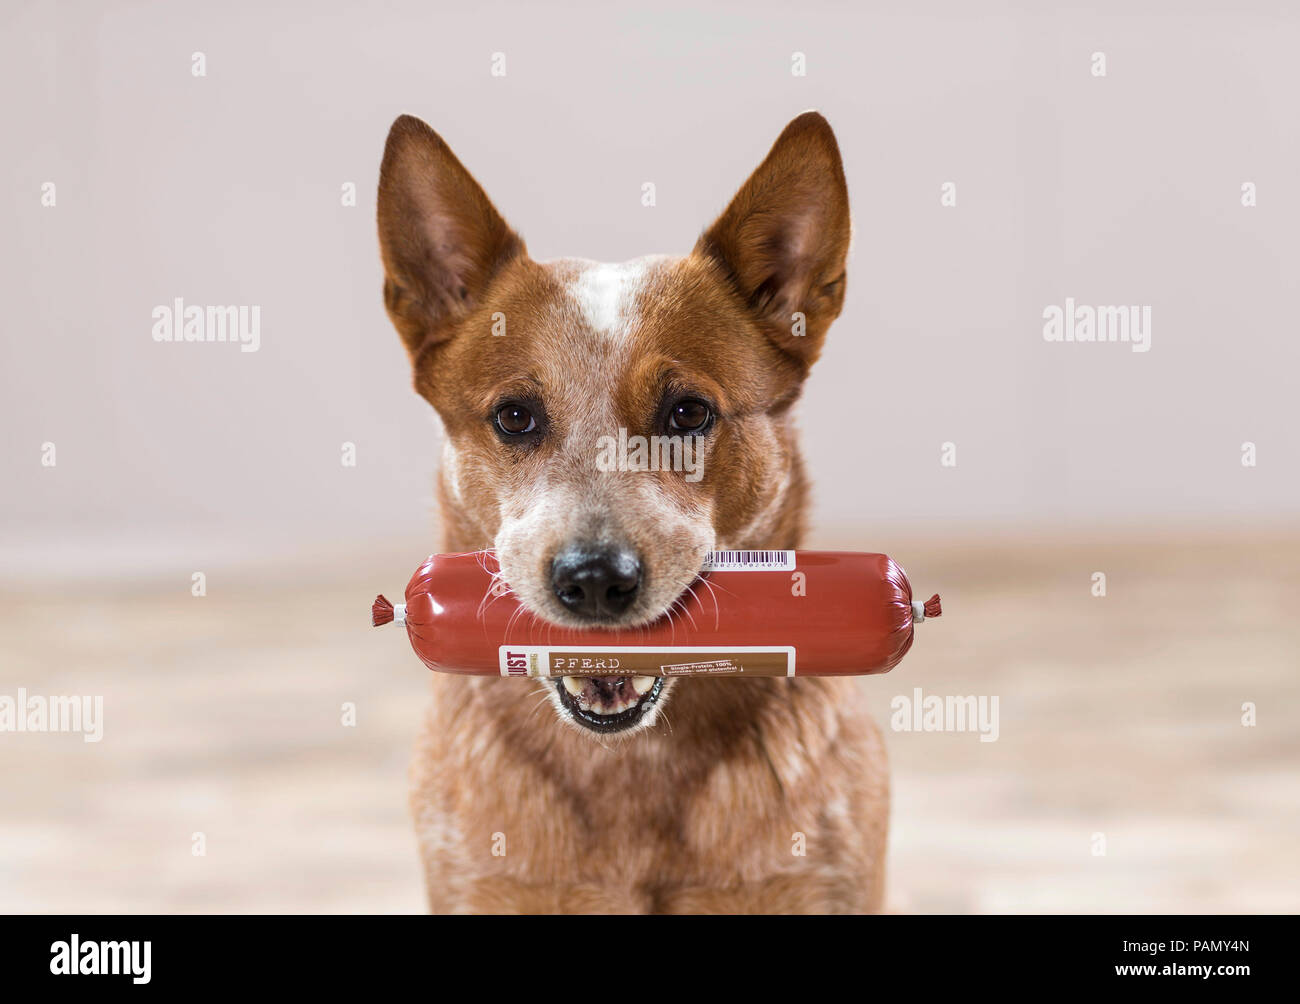 Australian Cattle Dog with raw sausage for dogs in the mouth. Germany Stock Photo